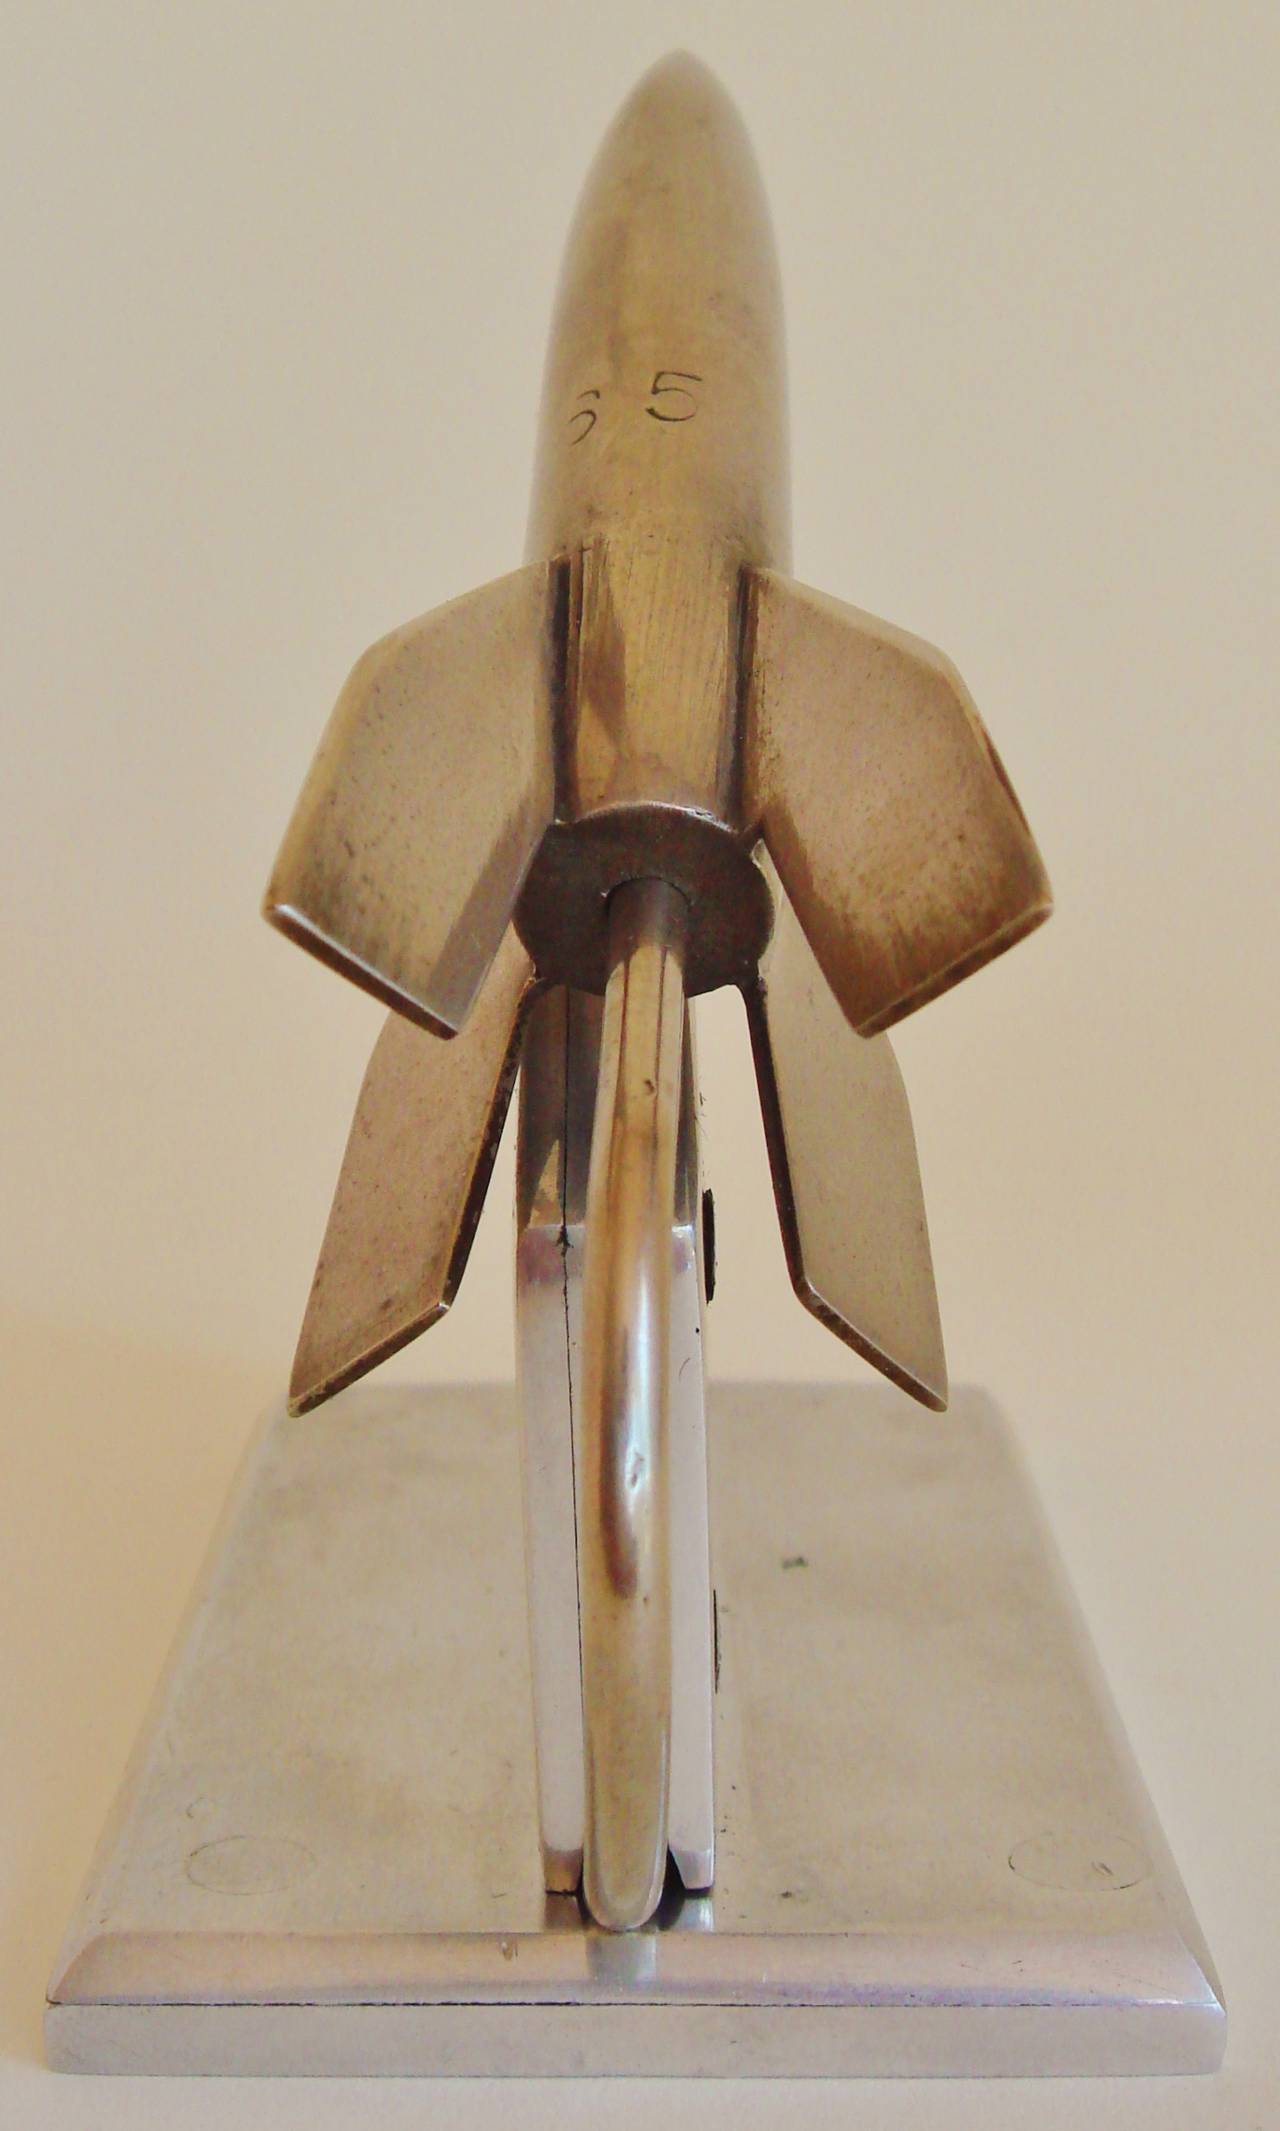 Mid-20th Century American Jet-Age Outsider or Trench Art Aluminium Double-Sided Rocket Frame